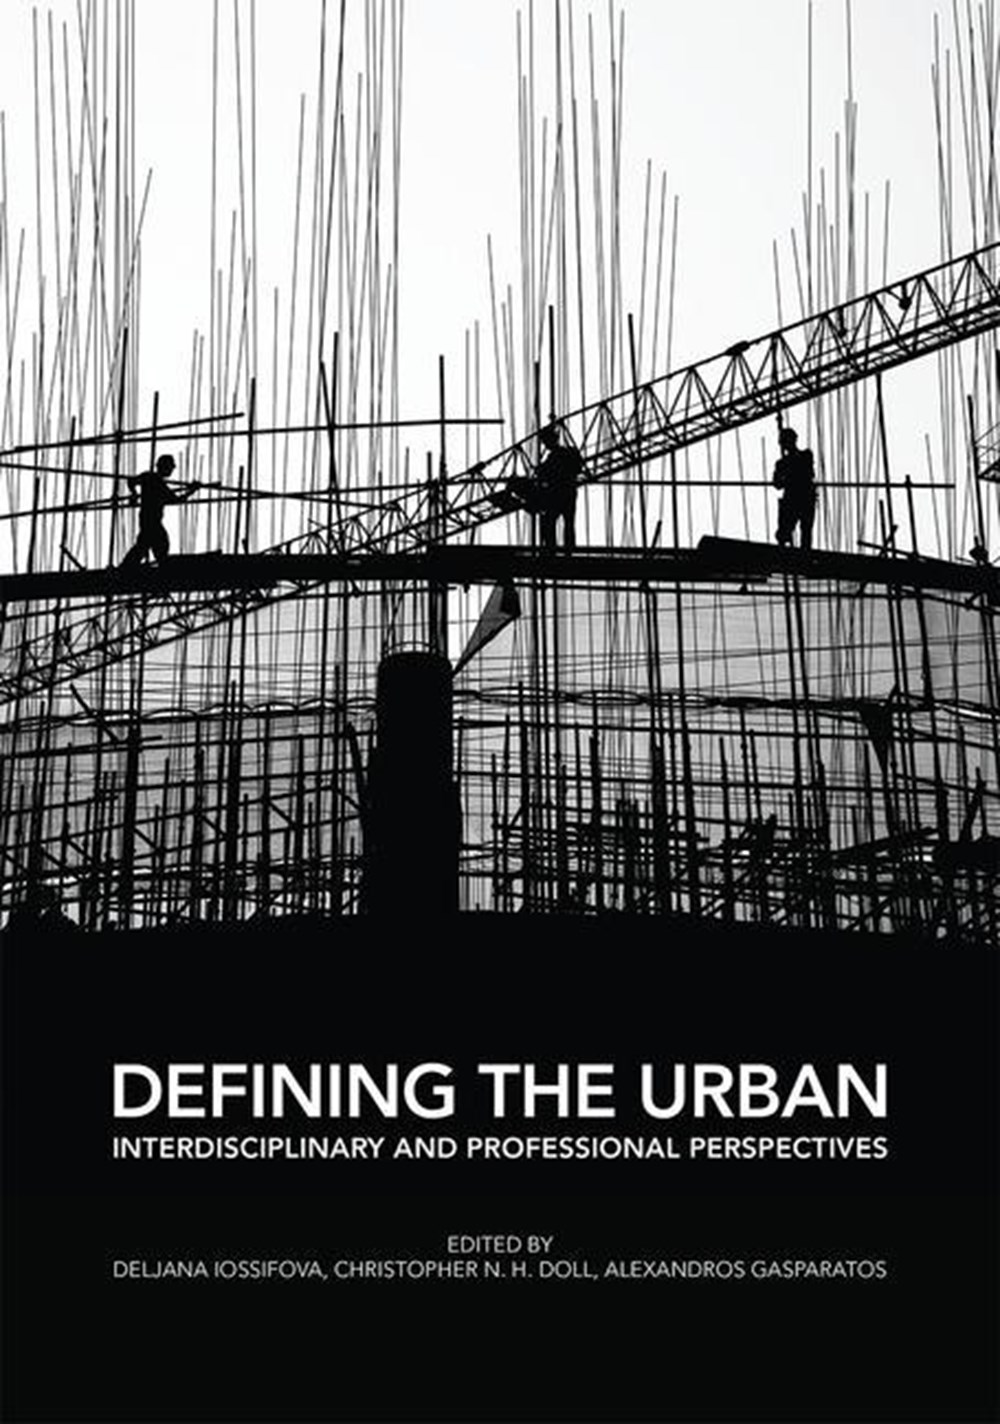 Defining the Urban: Interdisciplinary and Professional Perspectives